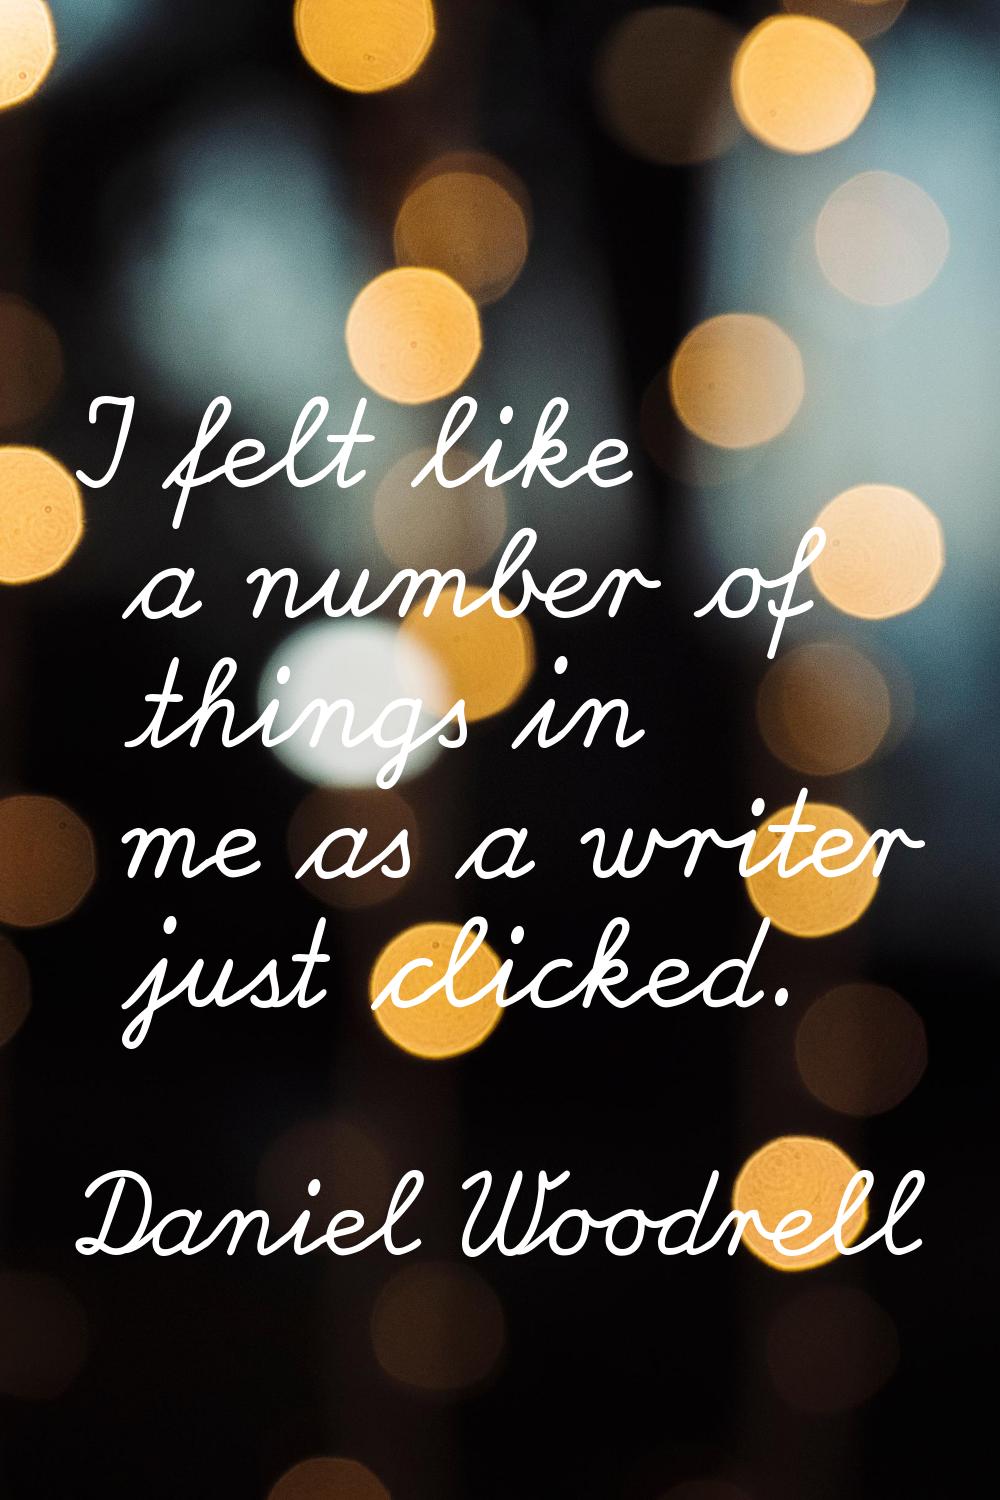 I felt like a number of things in me as a writer just clicked.